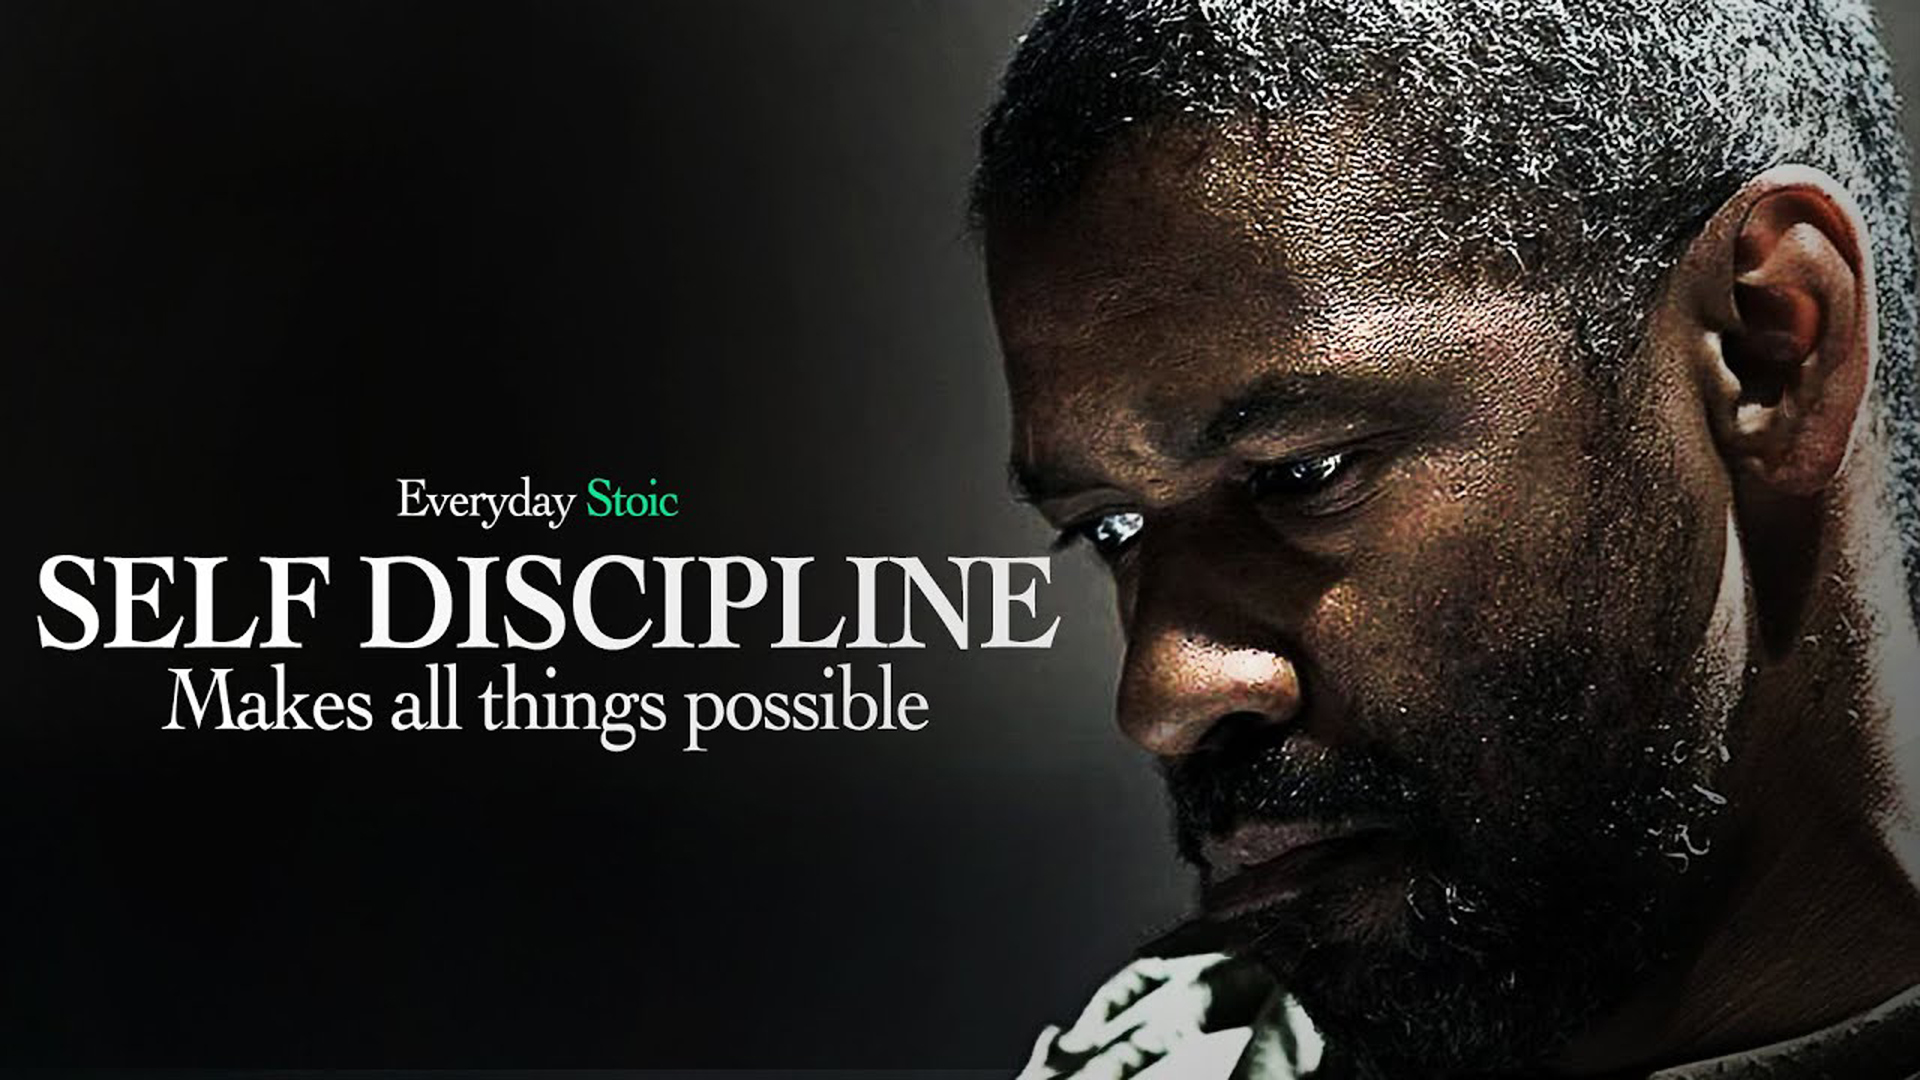 Everyday Stoic Self Discipline Makes All Things Possible HD Motivational